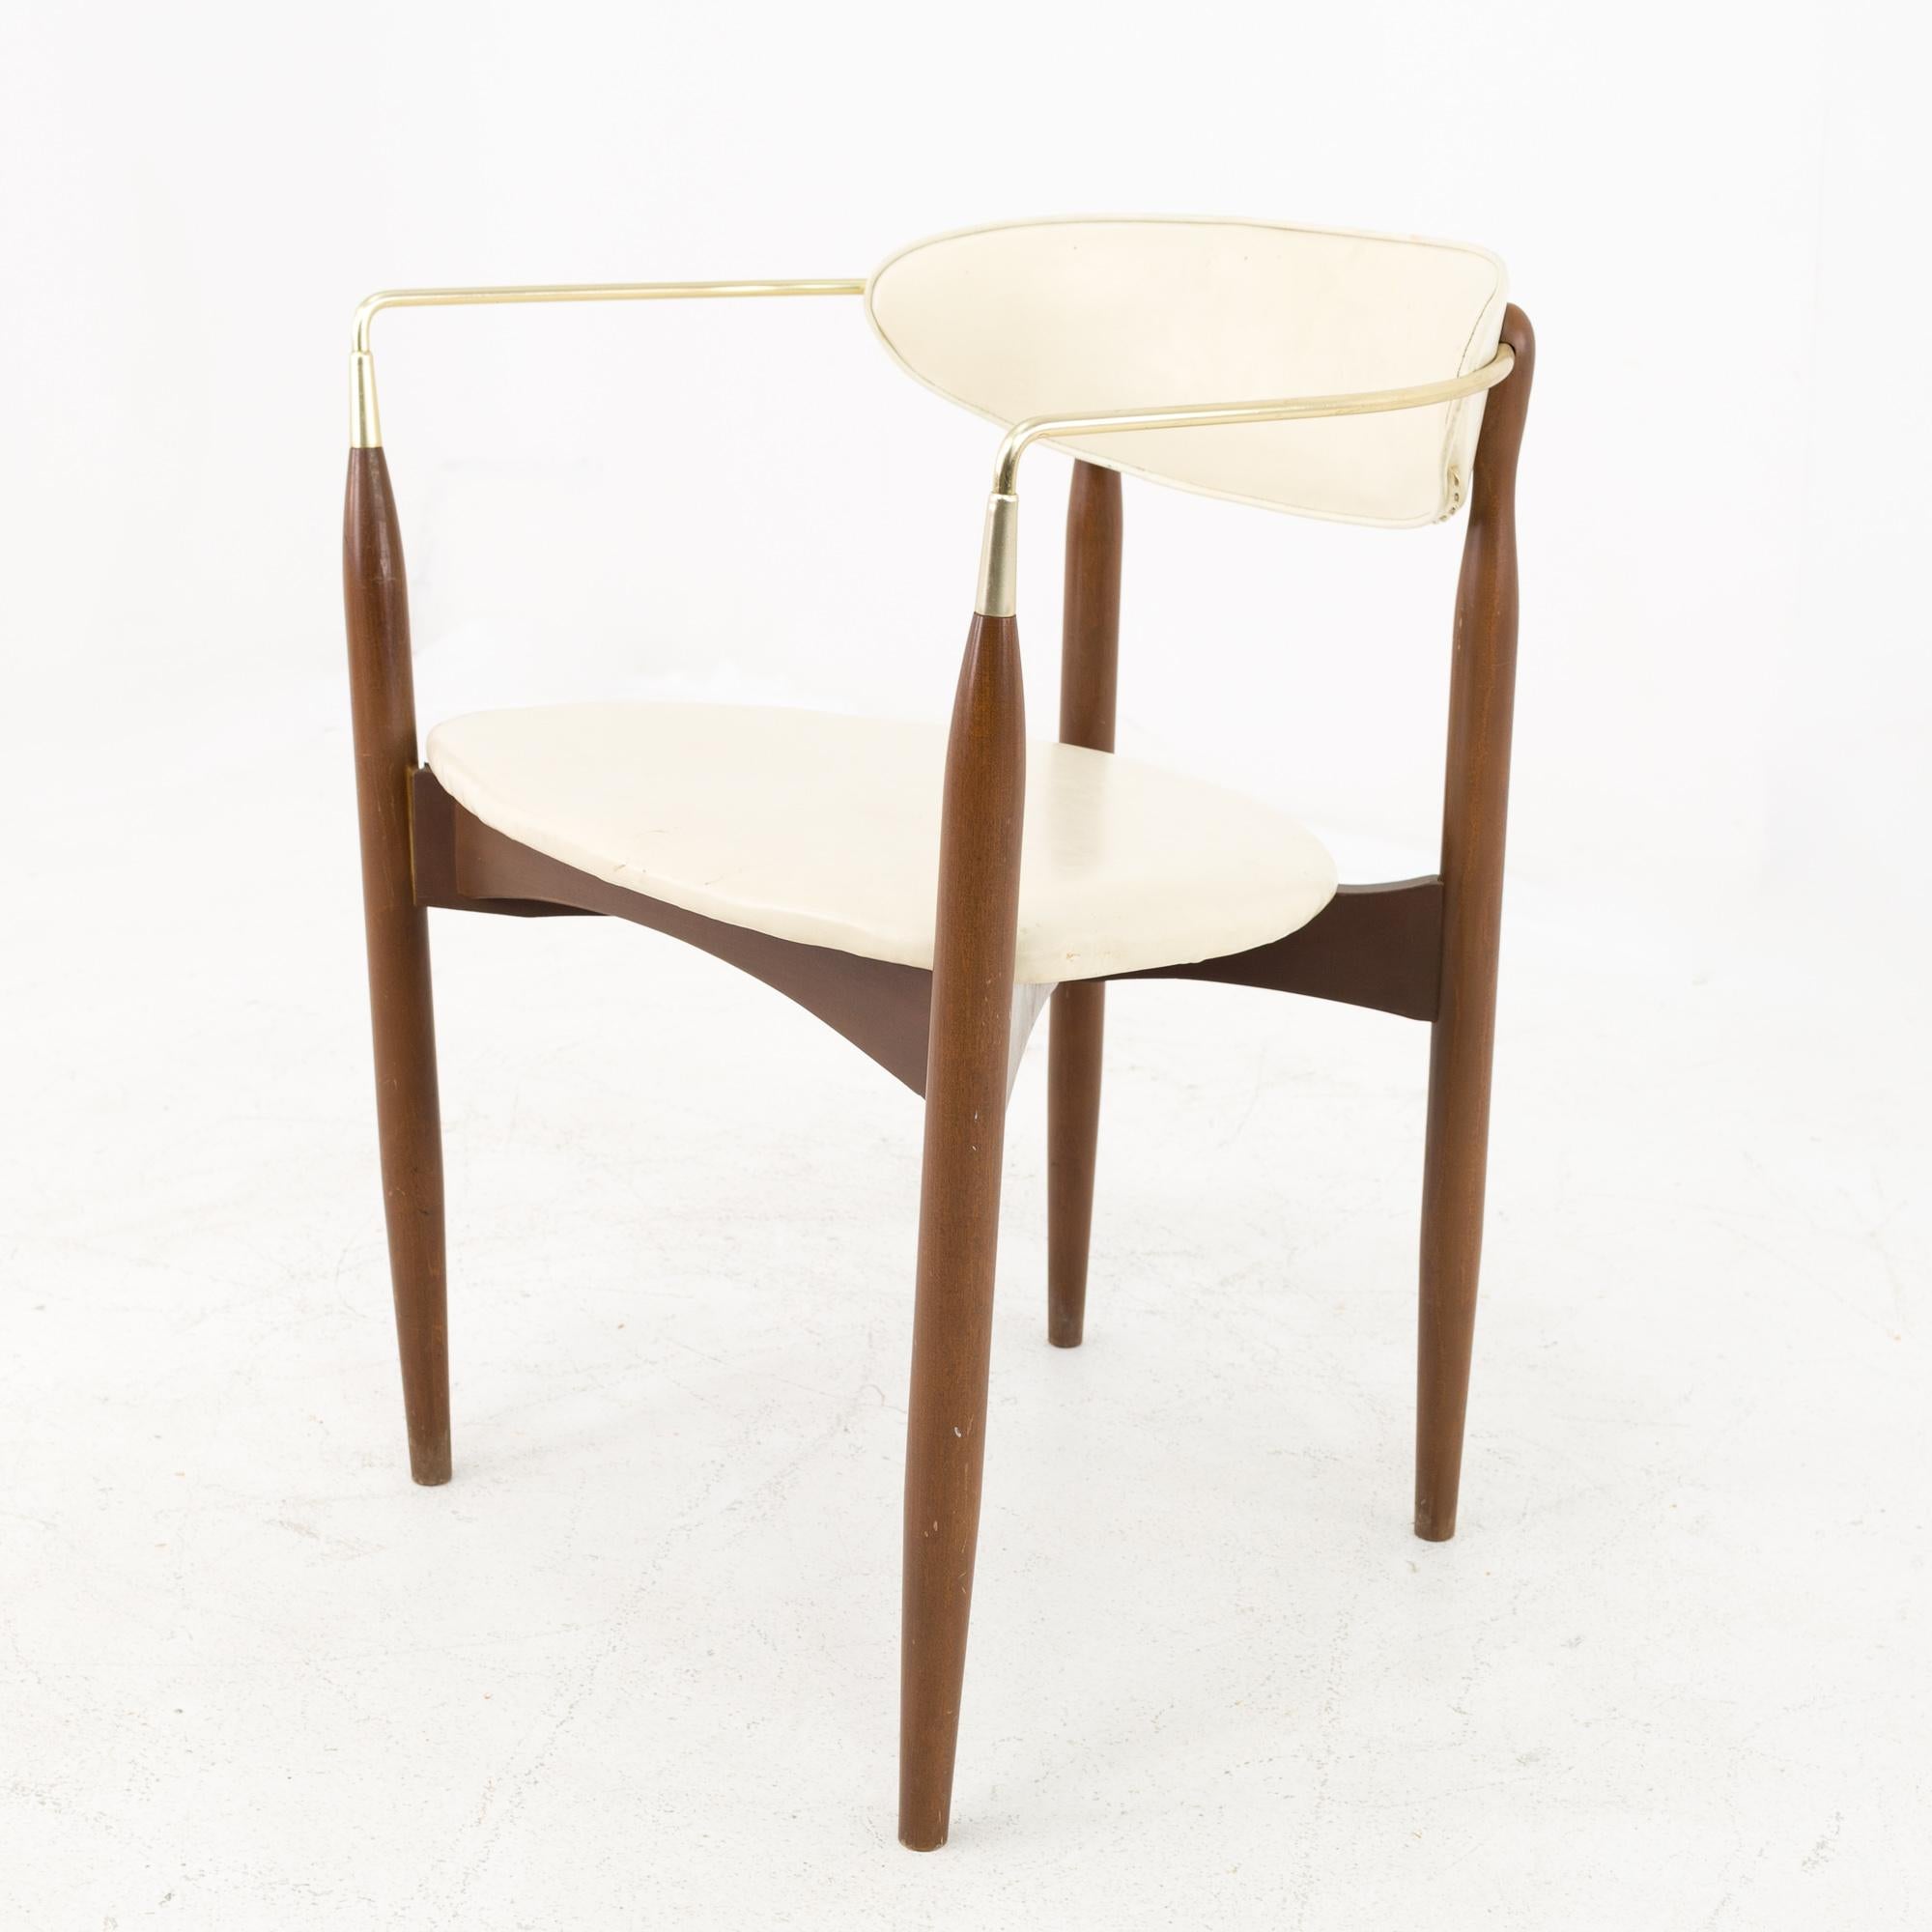 Dan Johnson for Selig Viscount Midcentury Walnut and Brass Dining Chairs, Pair 2